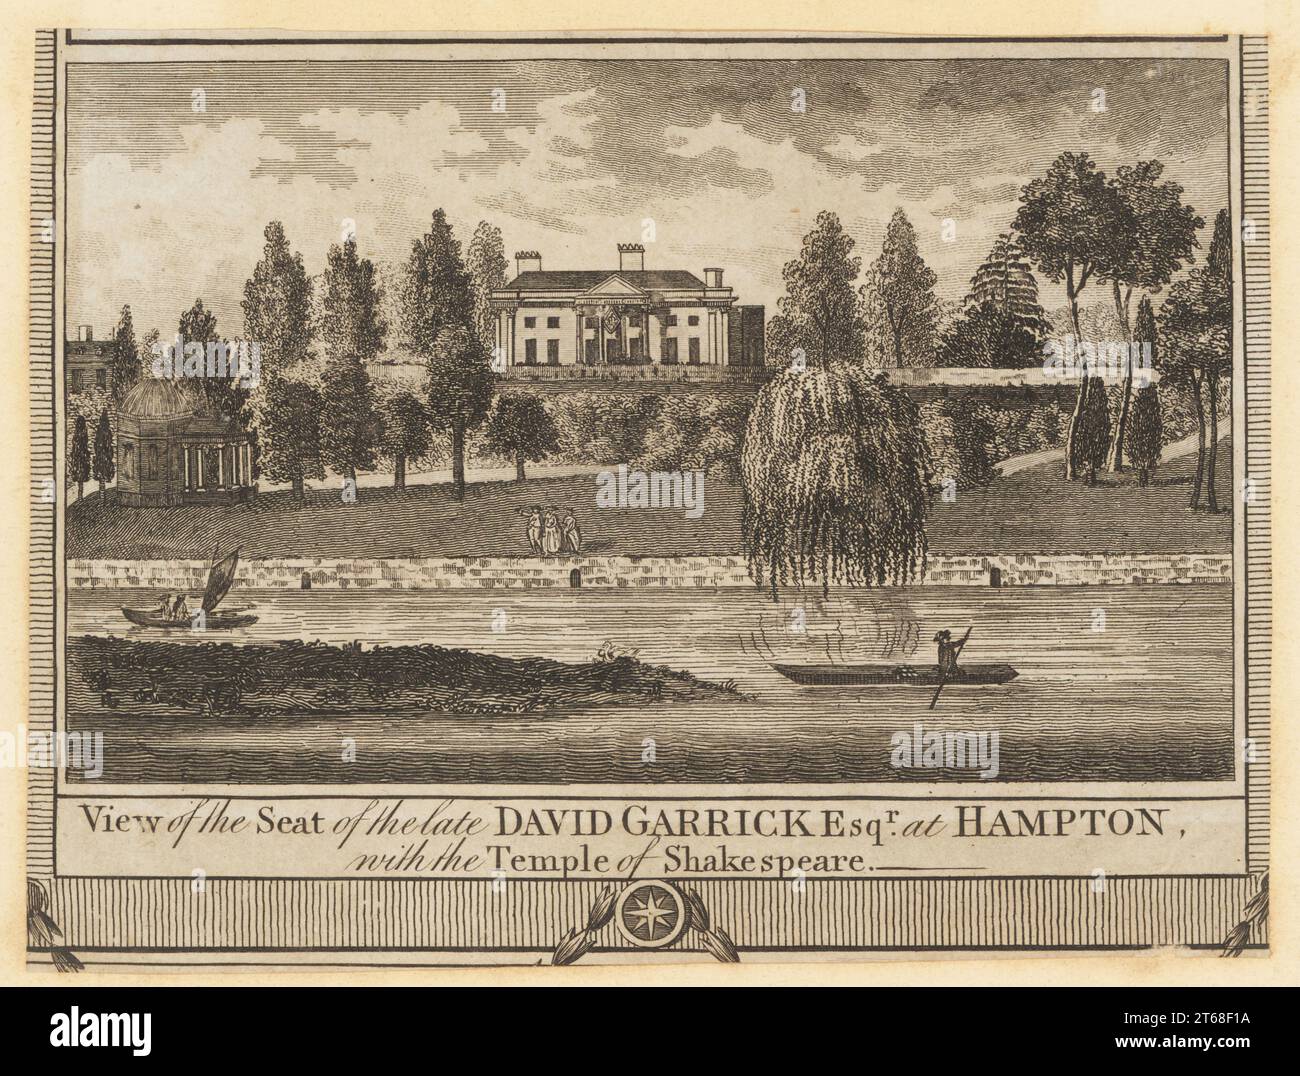 View of David Garrick's Villa, Hampton Court Road, 18th century. Seat of the late David Garrick Esq at Hampton. Portico by neoclassical architect Robert Adam added in the 1750s, and Temple of Shakespeare, an octagonal dome with Ionic portico, built in the garden around 1755. Copperplate engraving from William Thorntons New, Complete and Universal History of the City of London, Alexander Hogg, King's Arms, No. 16 Paternoster Row, London, 1784. Stock Photo